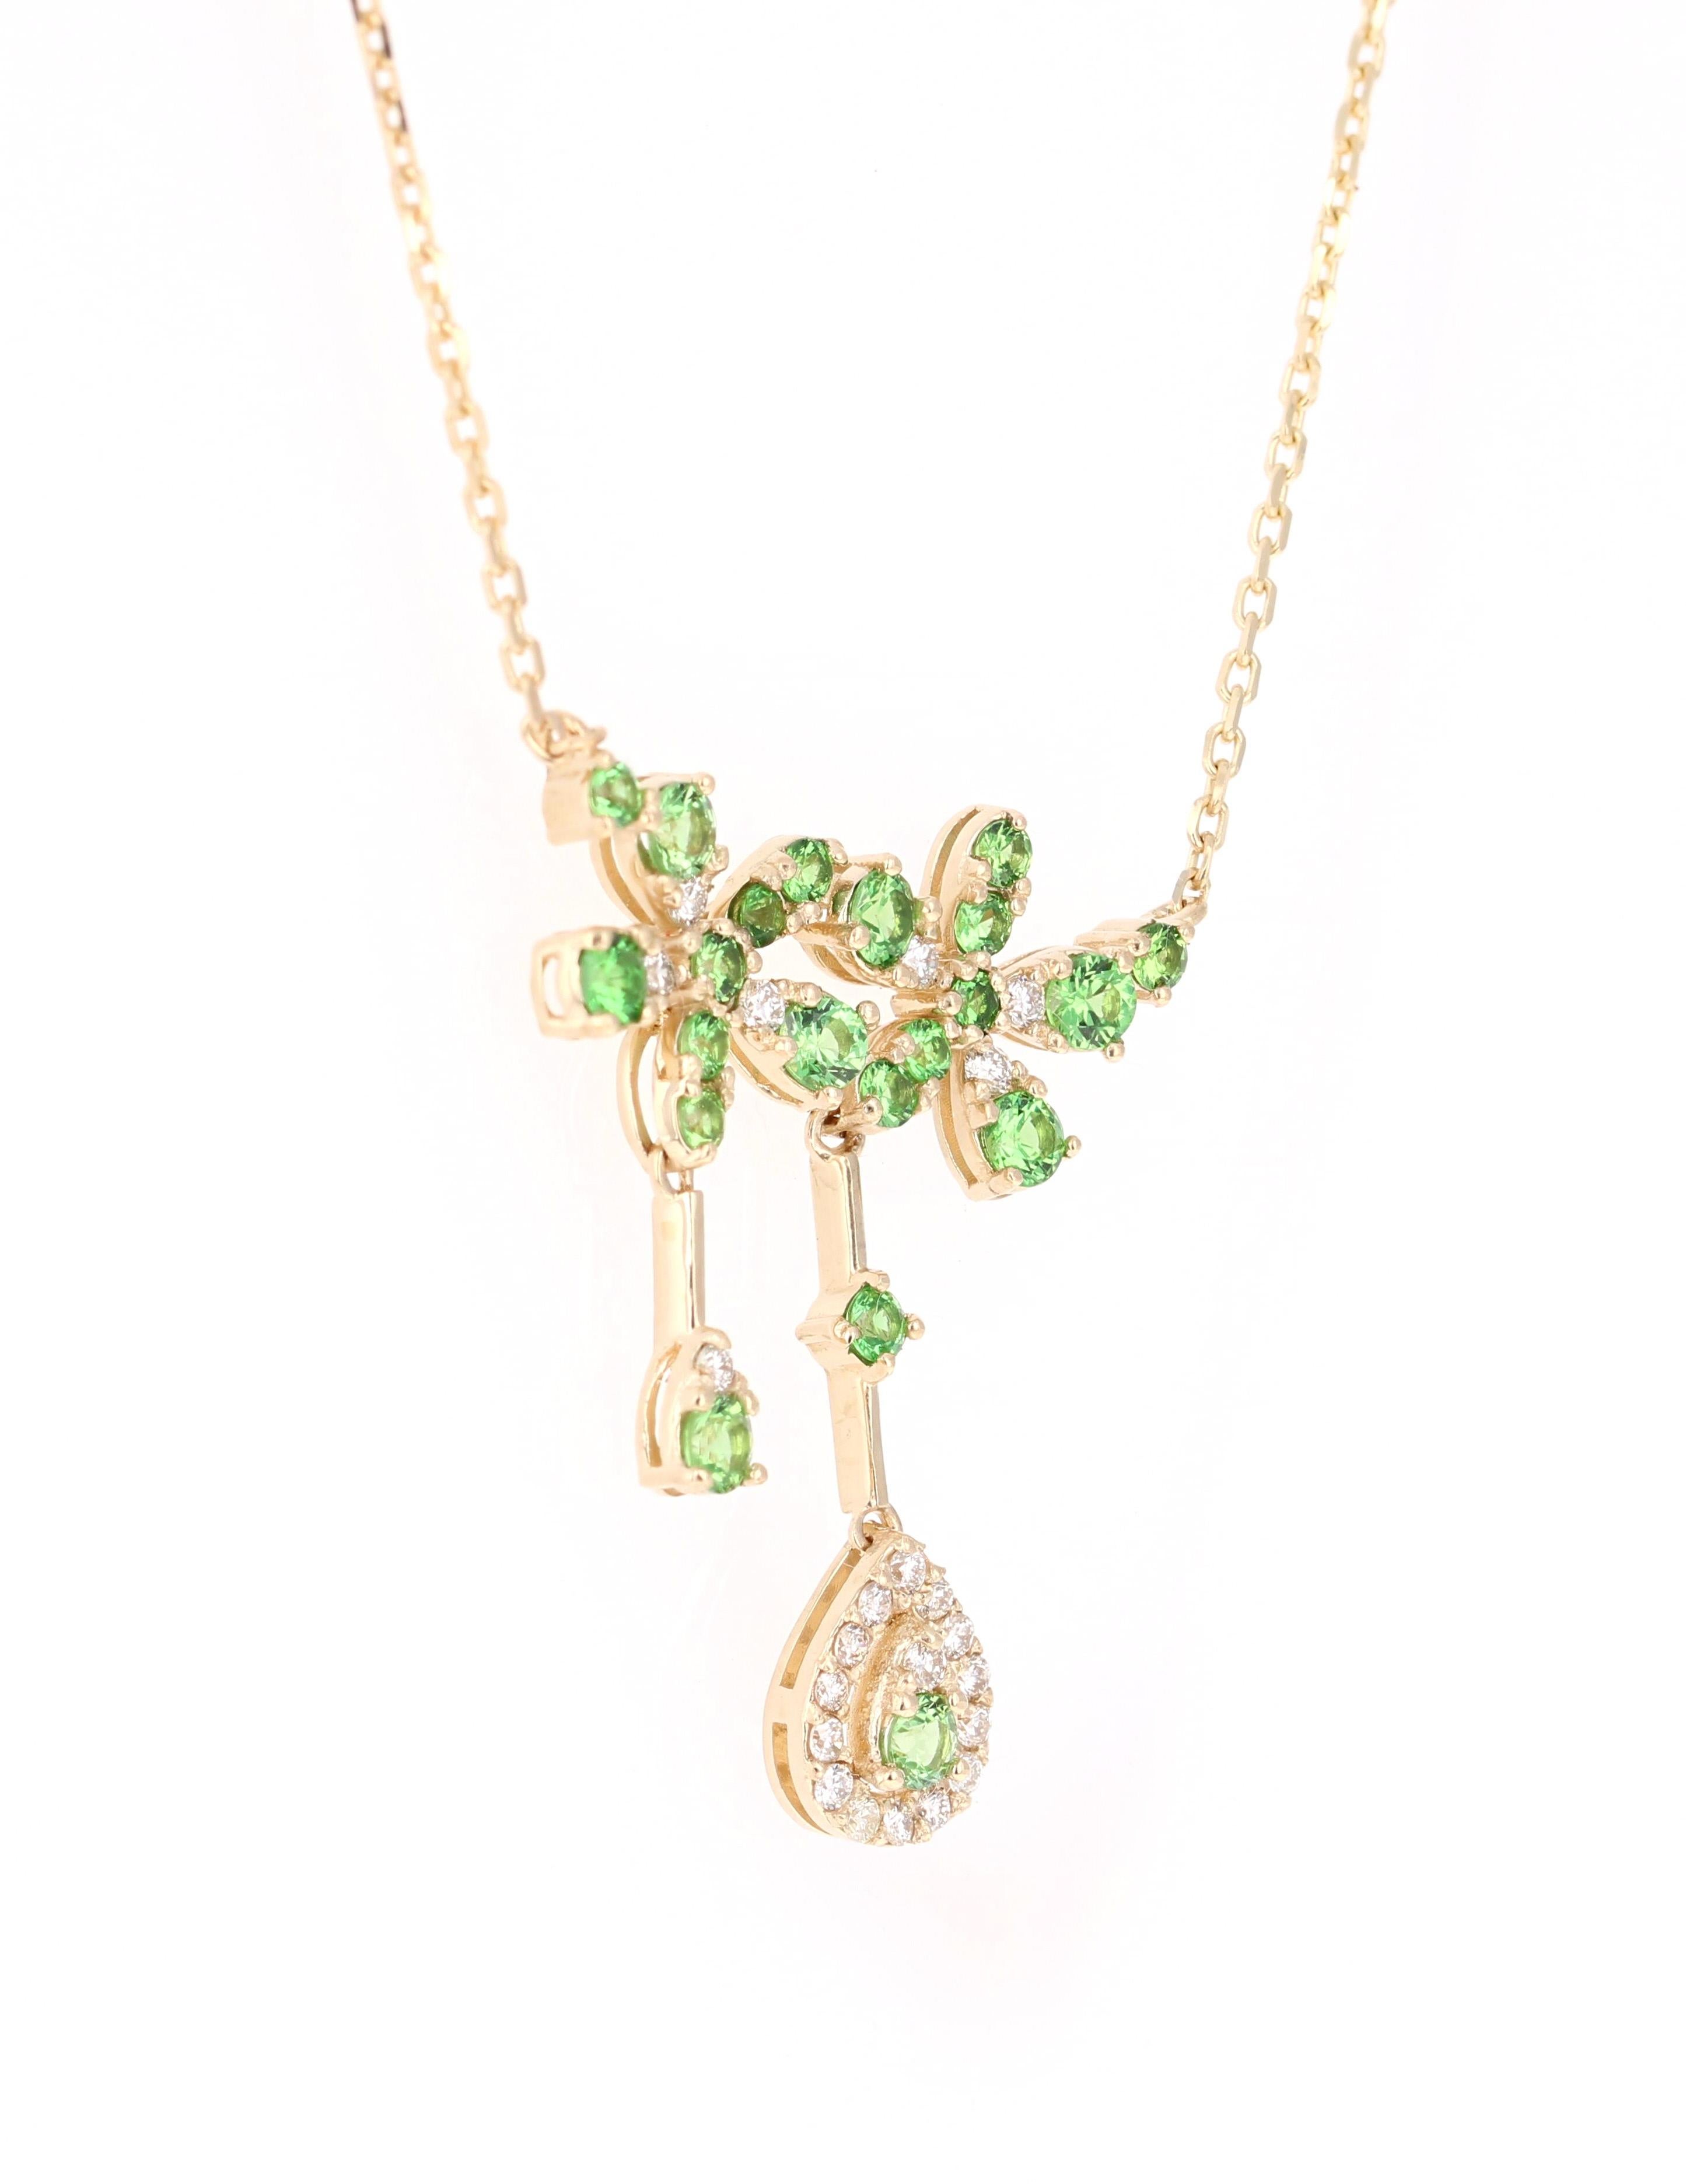 This unique chain necklace has 21 Tsavorites that weigh 1.18 Carats and 22 Round Cut Diamonds that weigh 0.33 Carats. (Clarity: SI, Color: F) The total carat weight of the ring is 1.51 Carats. 

The necklace is made in 14K Yellow Gold and weighs